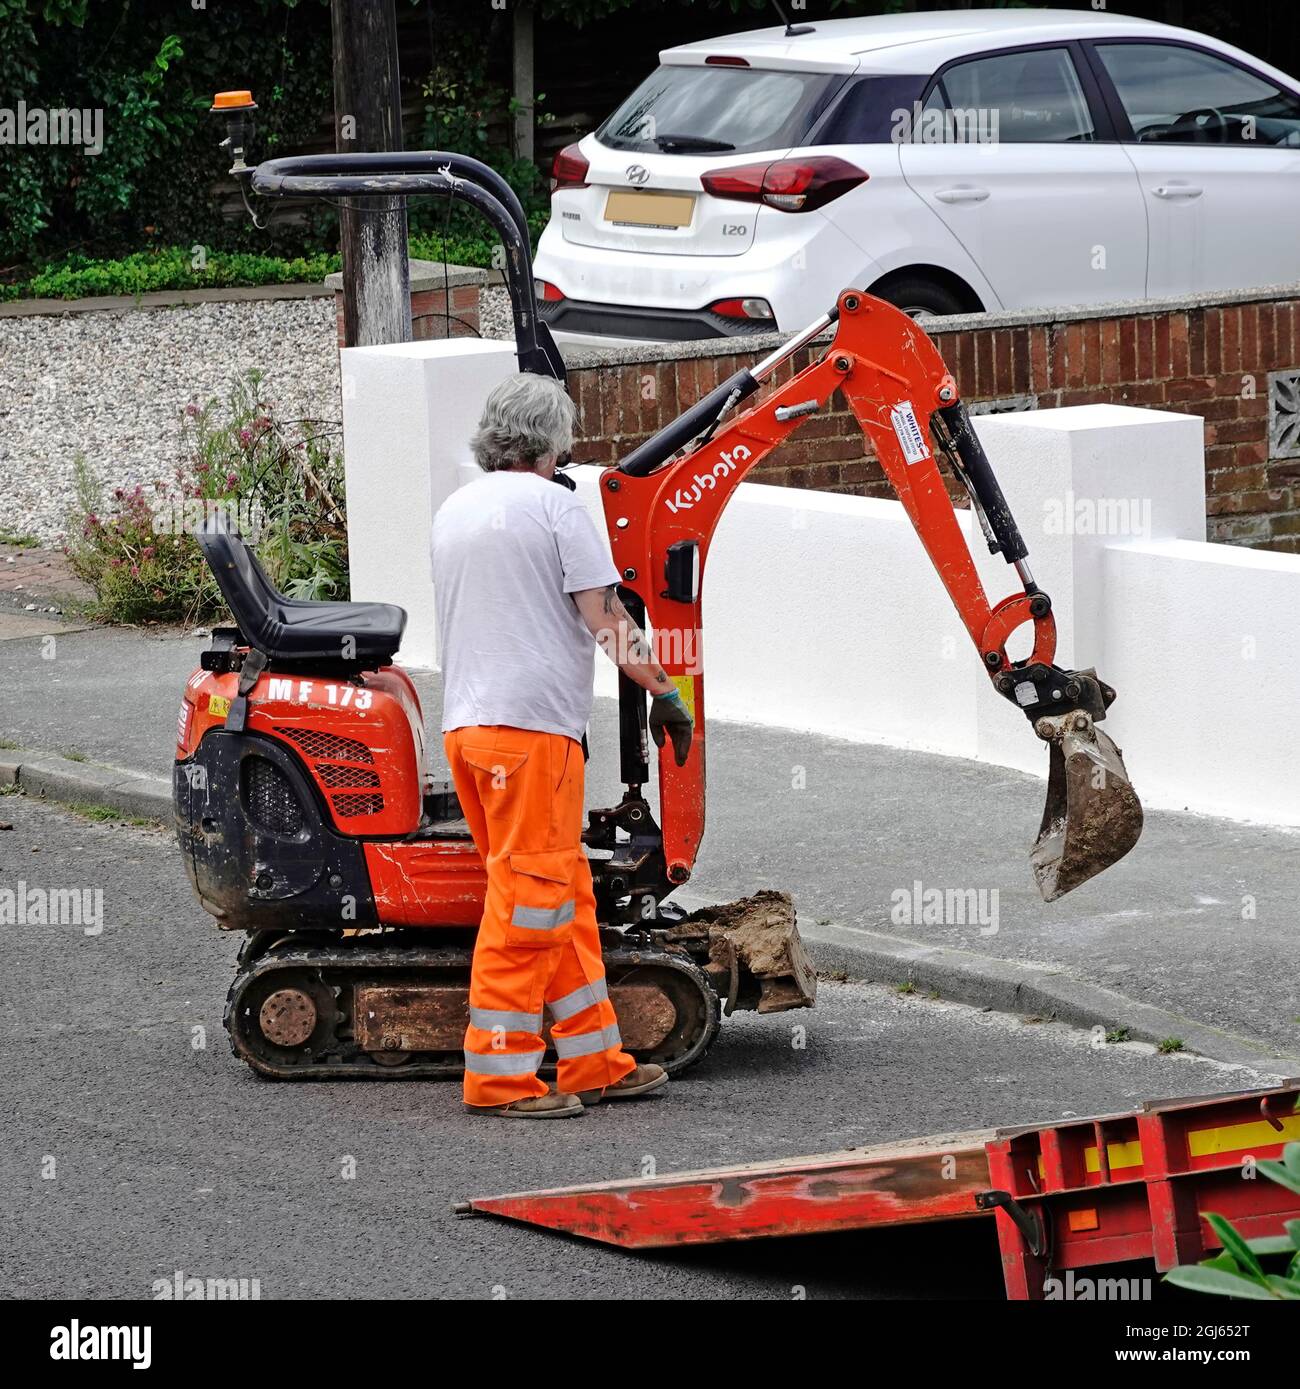 Mini digger excavator on hire lorry truck driver steering digger machine on or off vehicle ramp on road delivery or collection from building site UK Stock Photo